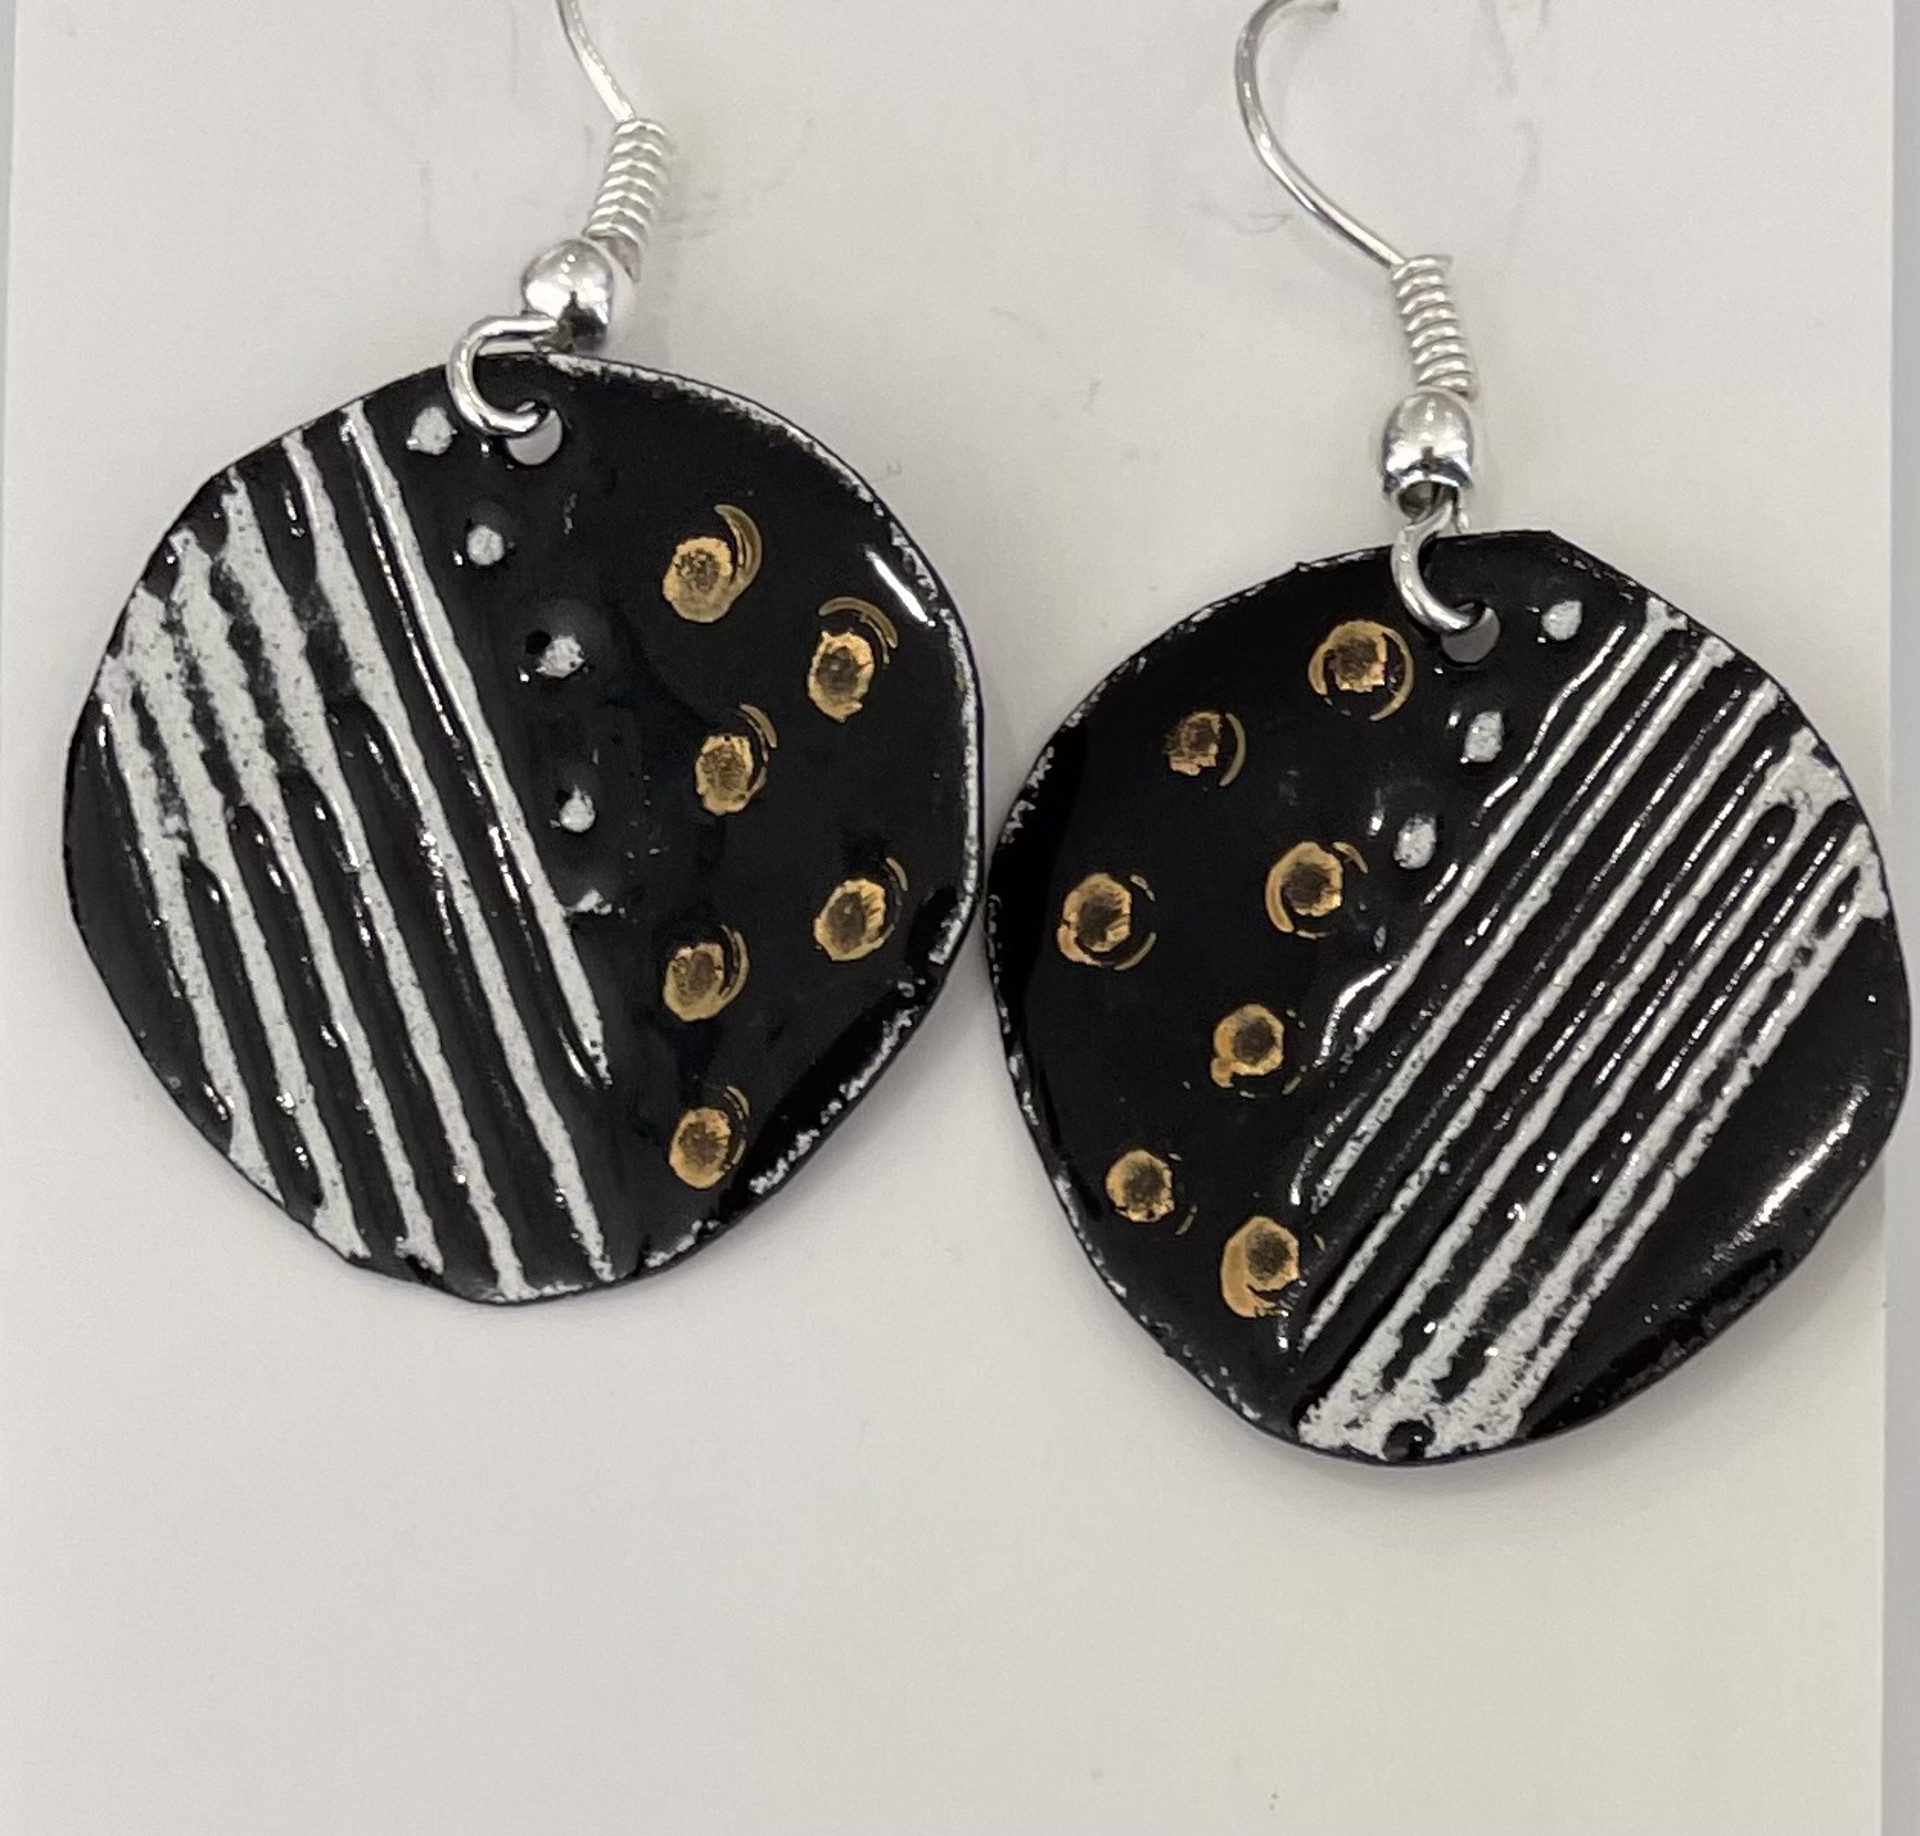 Earrings Black, White, and Gold 7.11 by Cathy Talbot